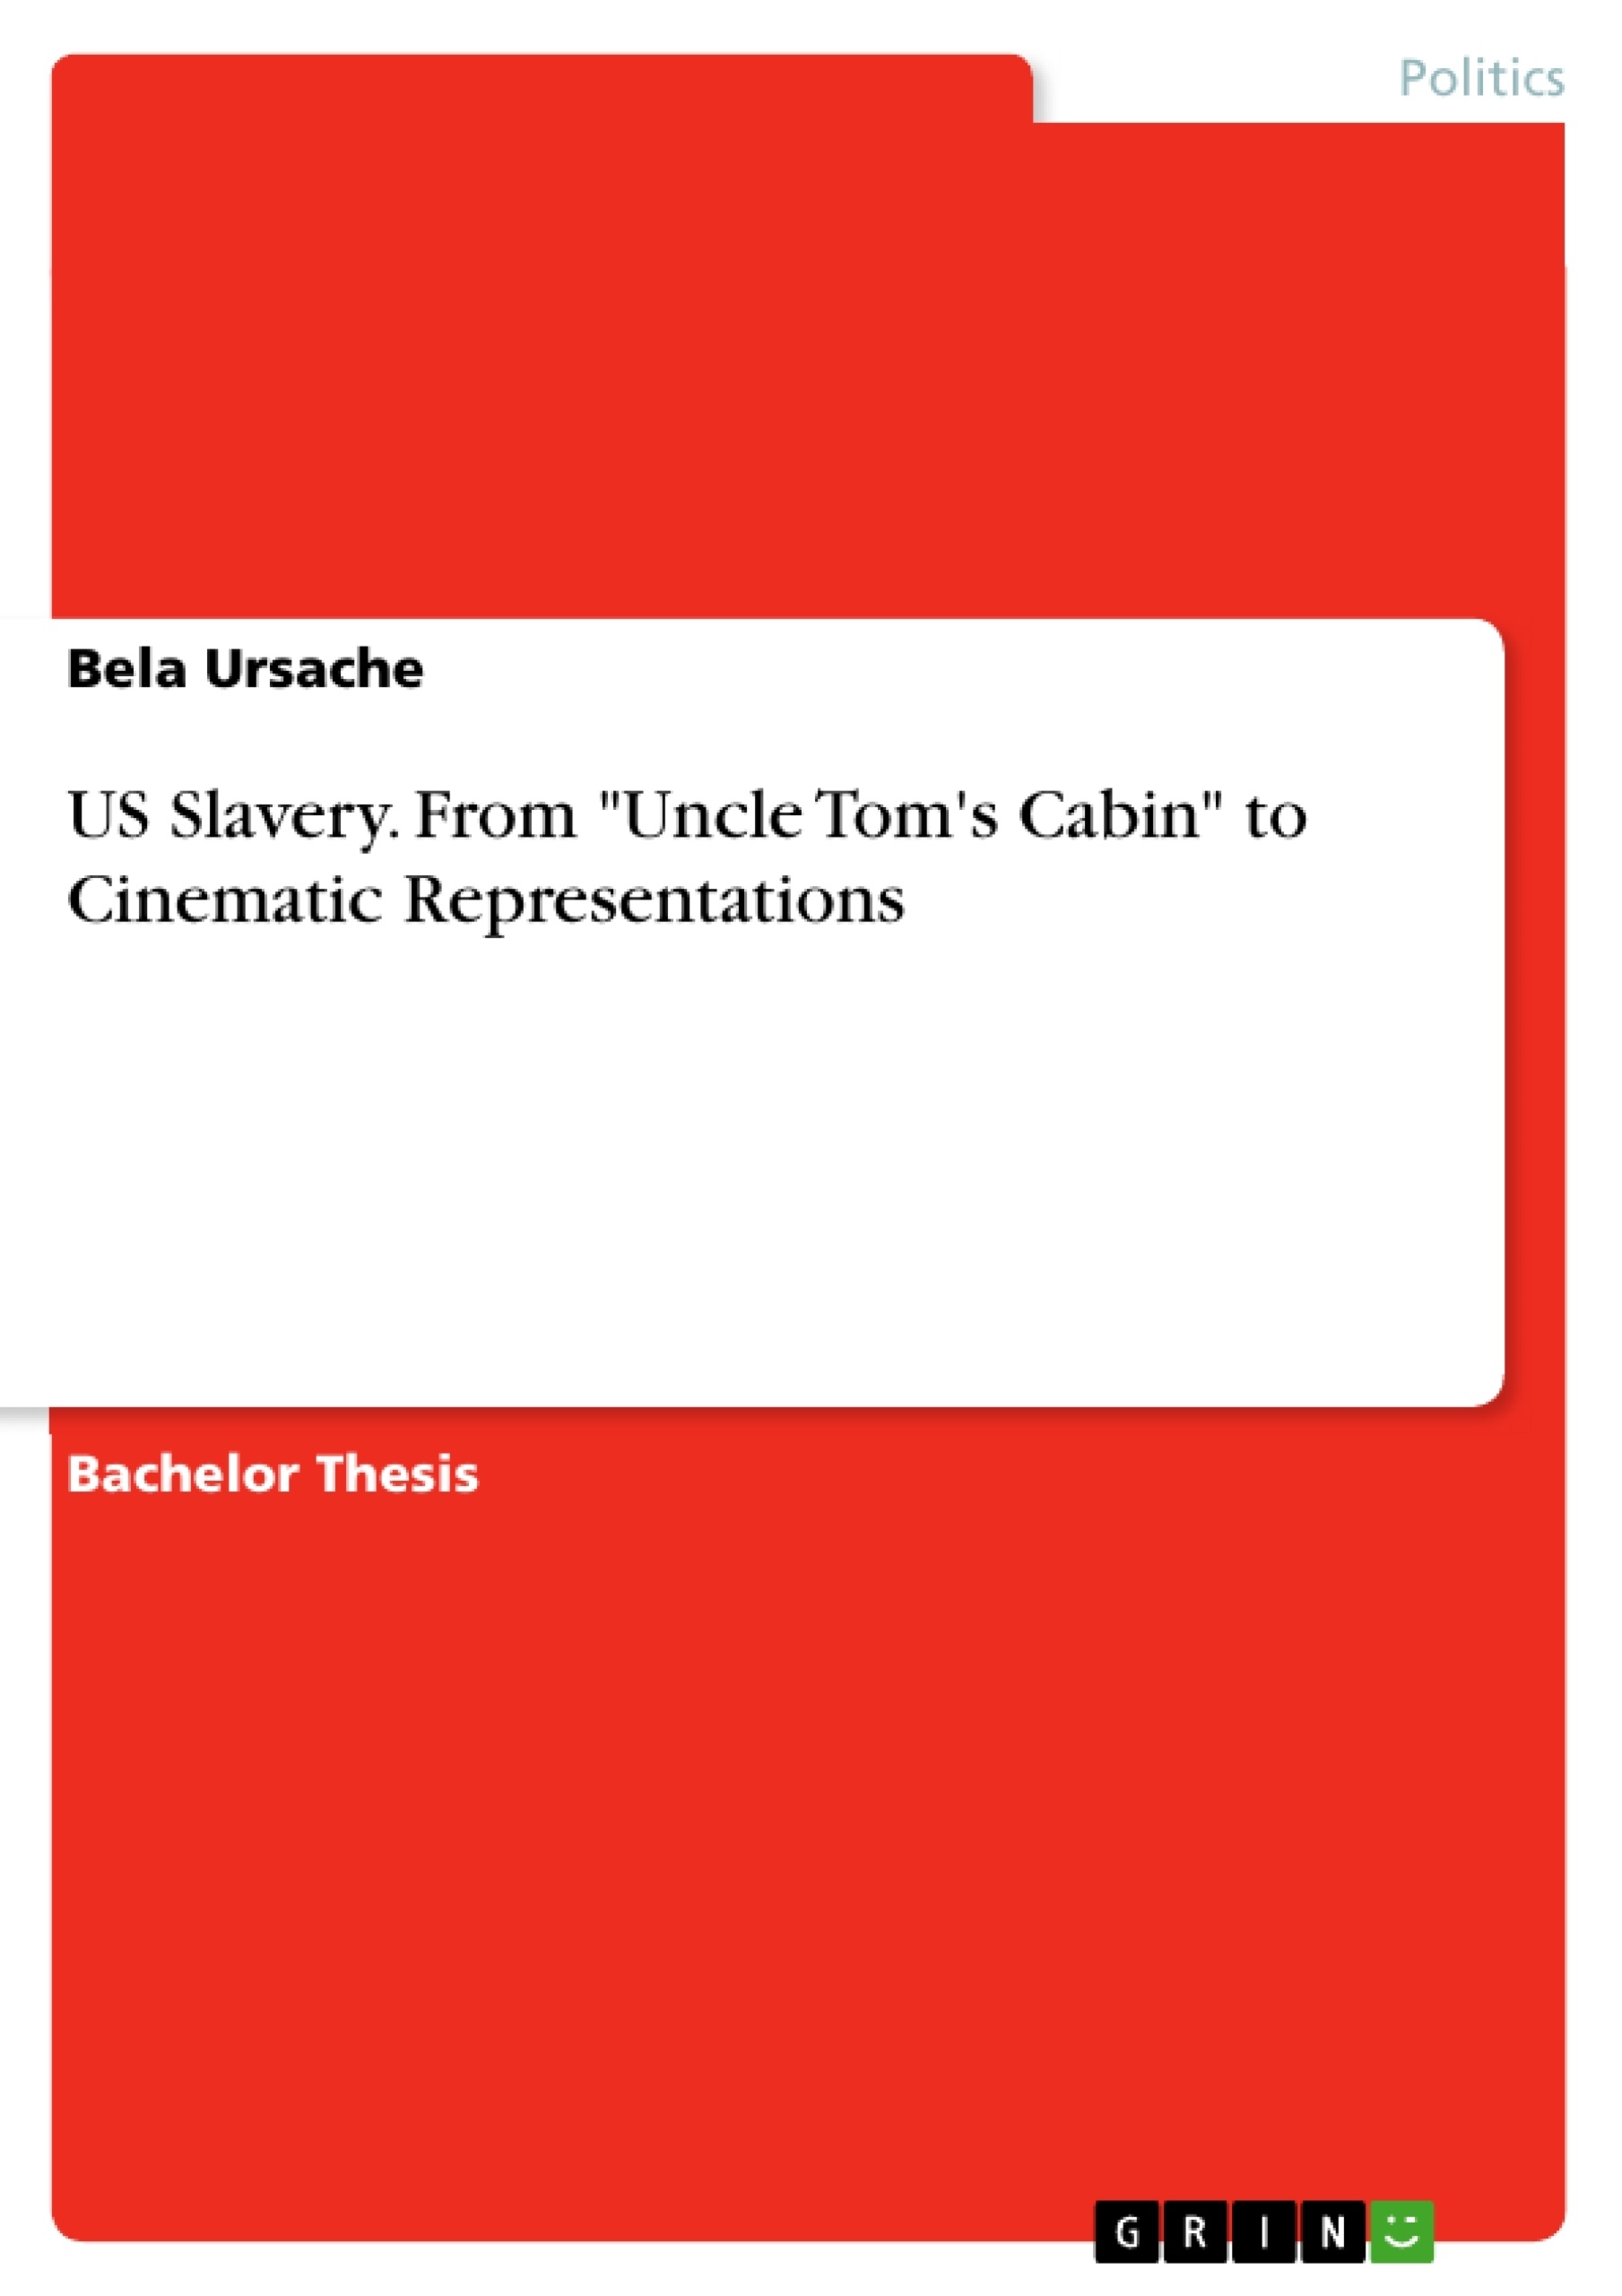 Título: US Slavery. From "Uncle Tom's Cabin" to Cinematic Representations